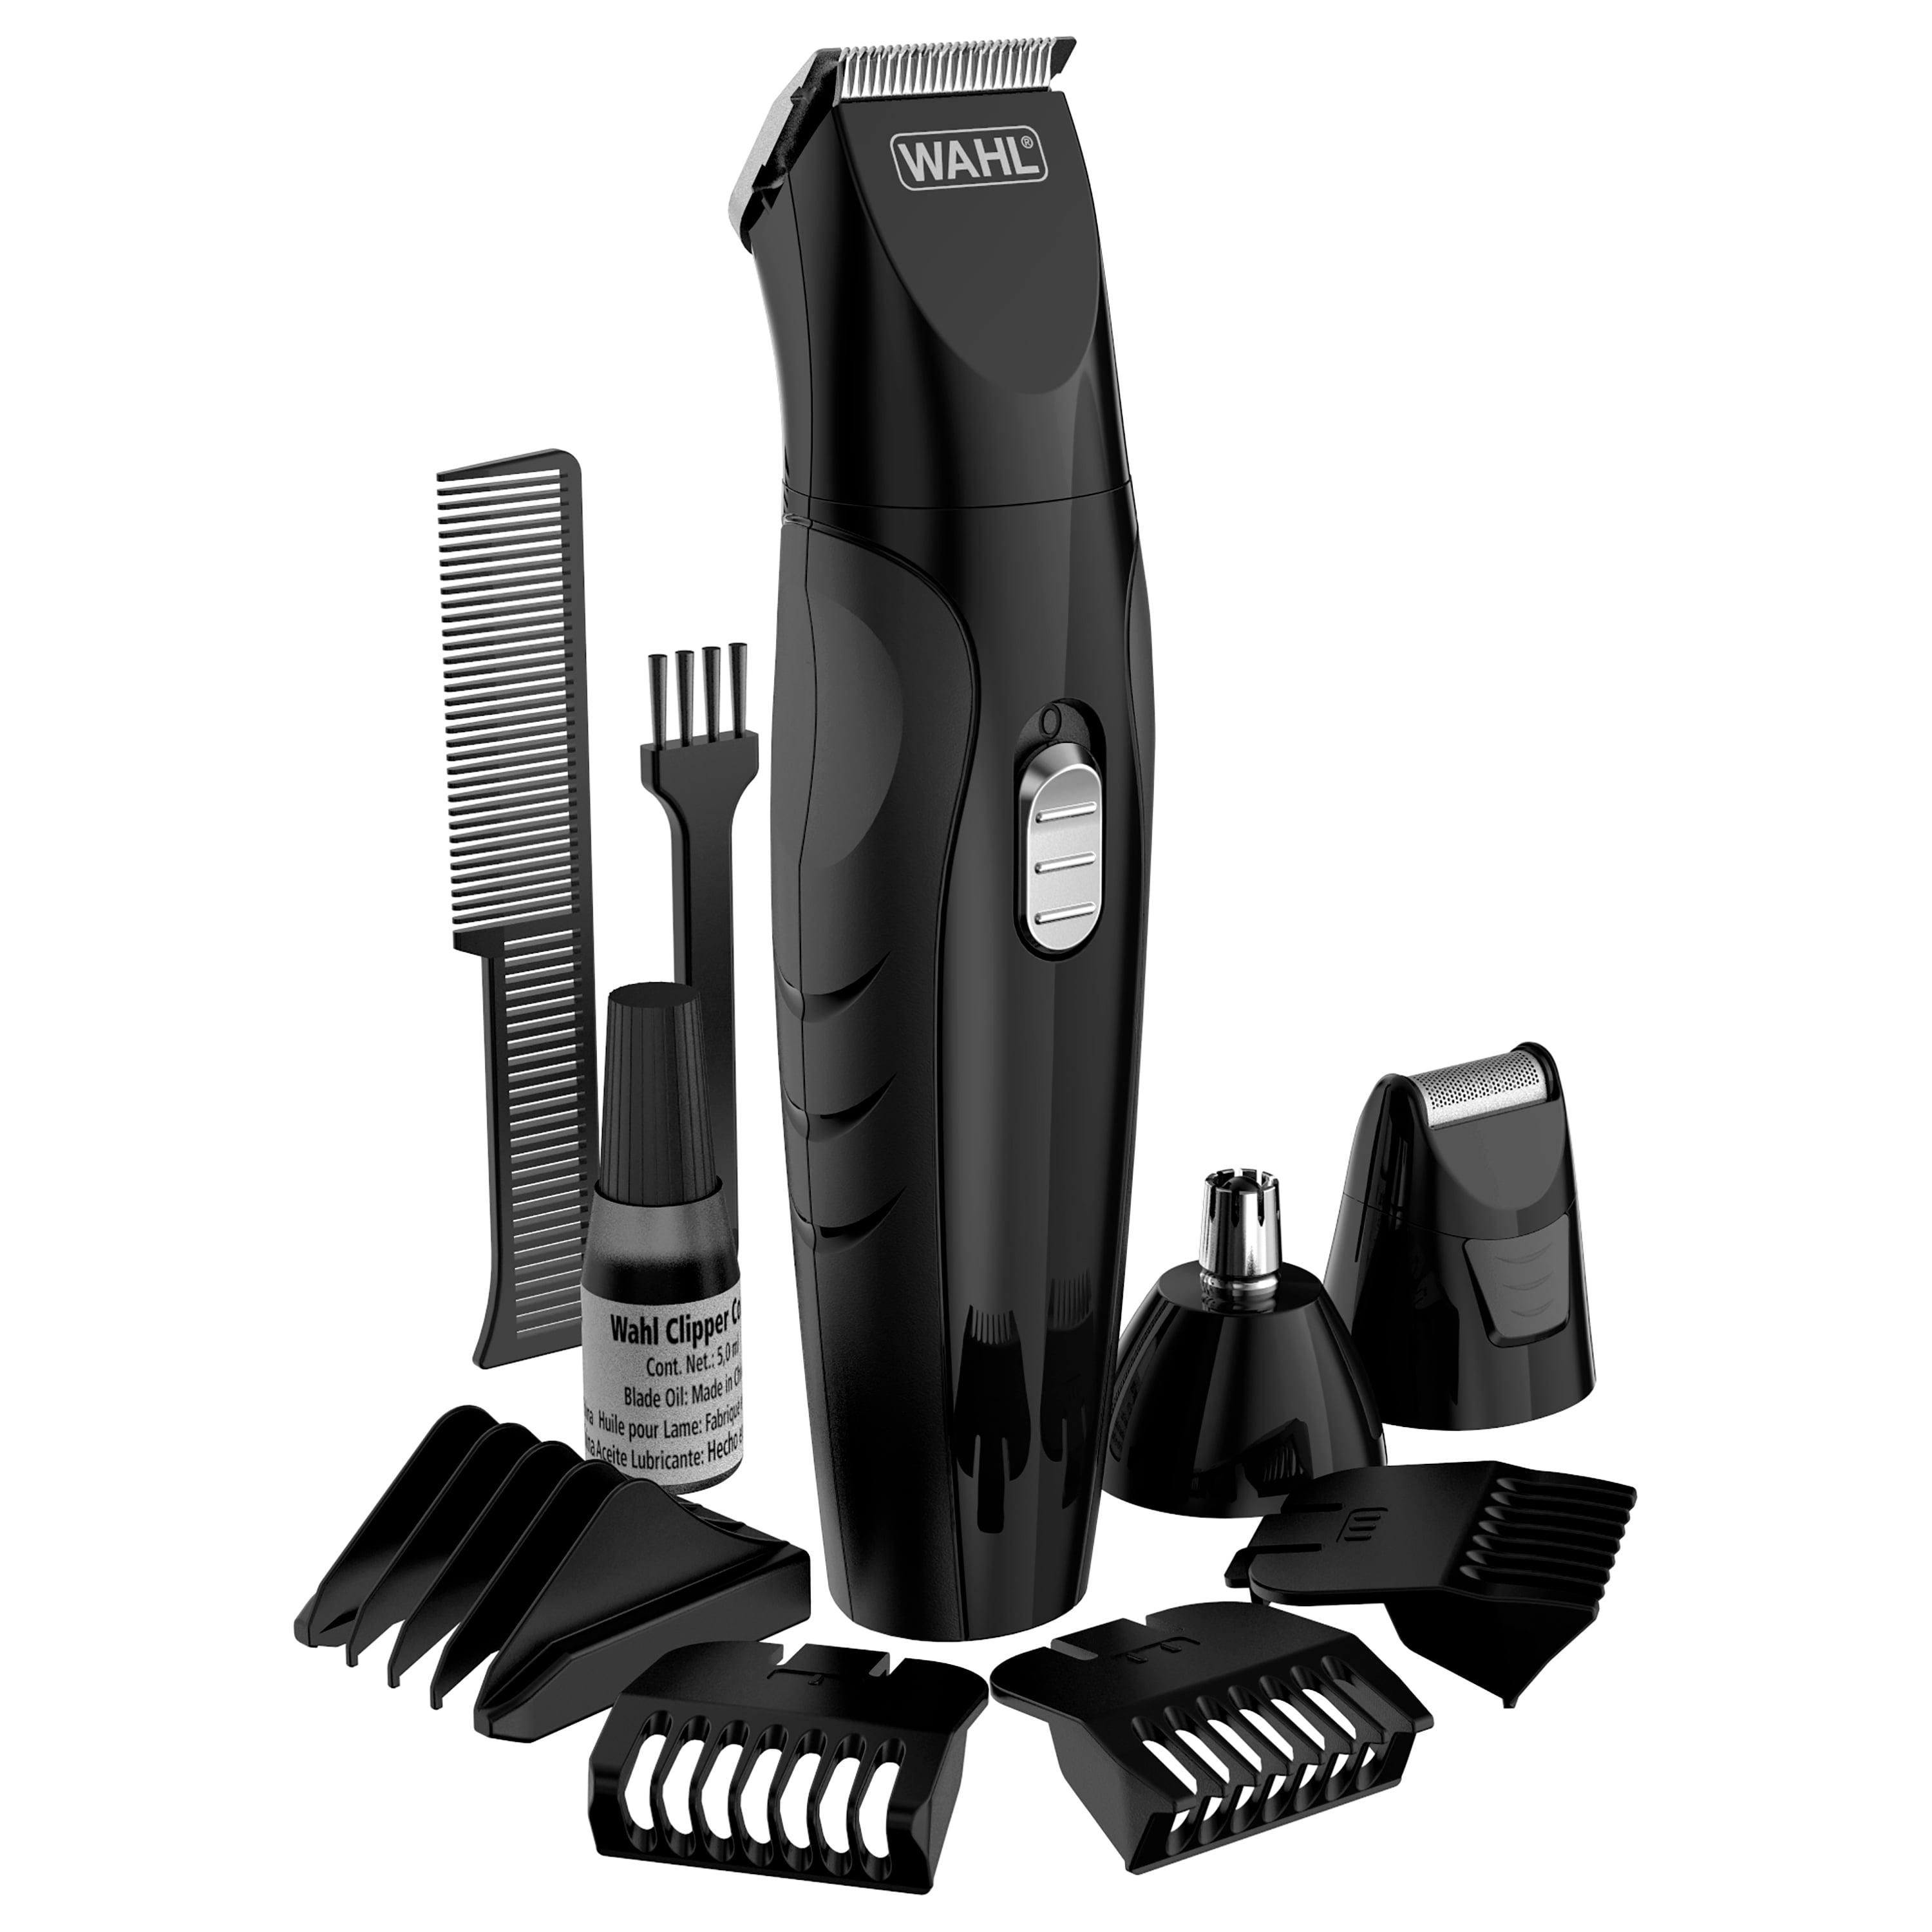 wahl model 9685 charger